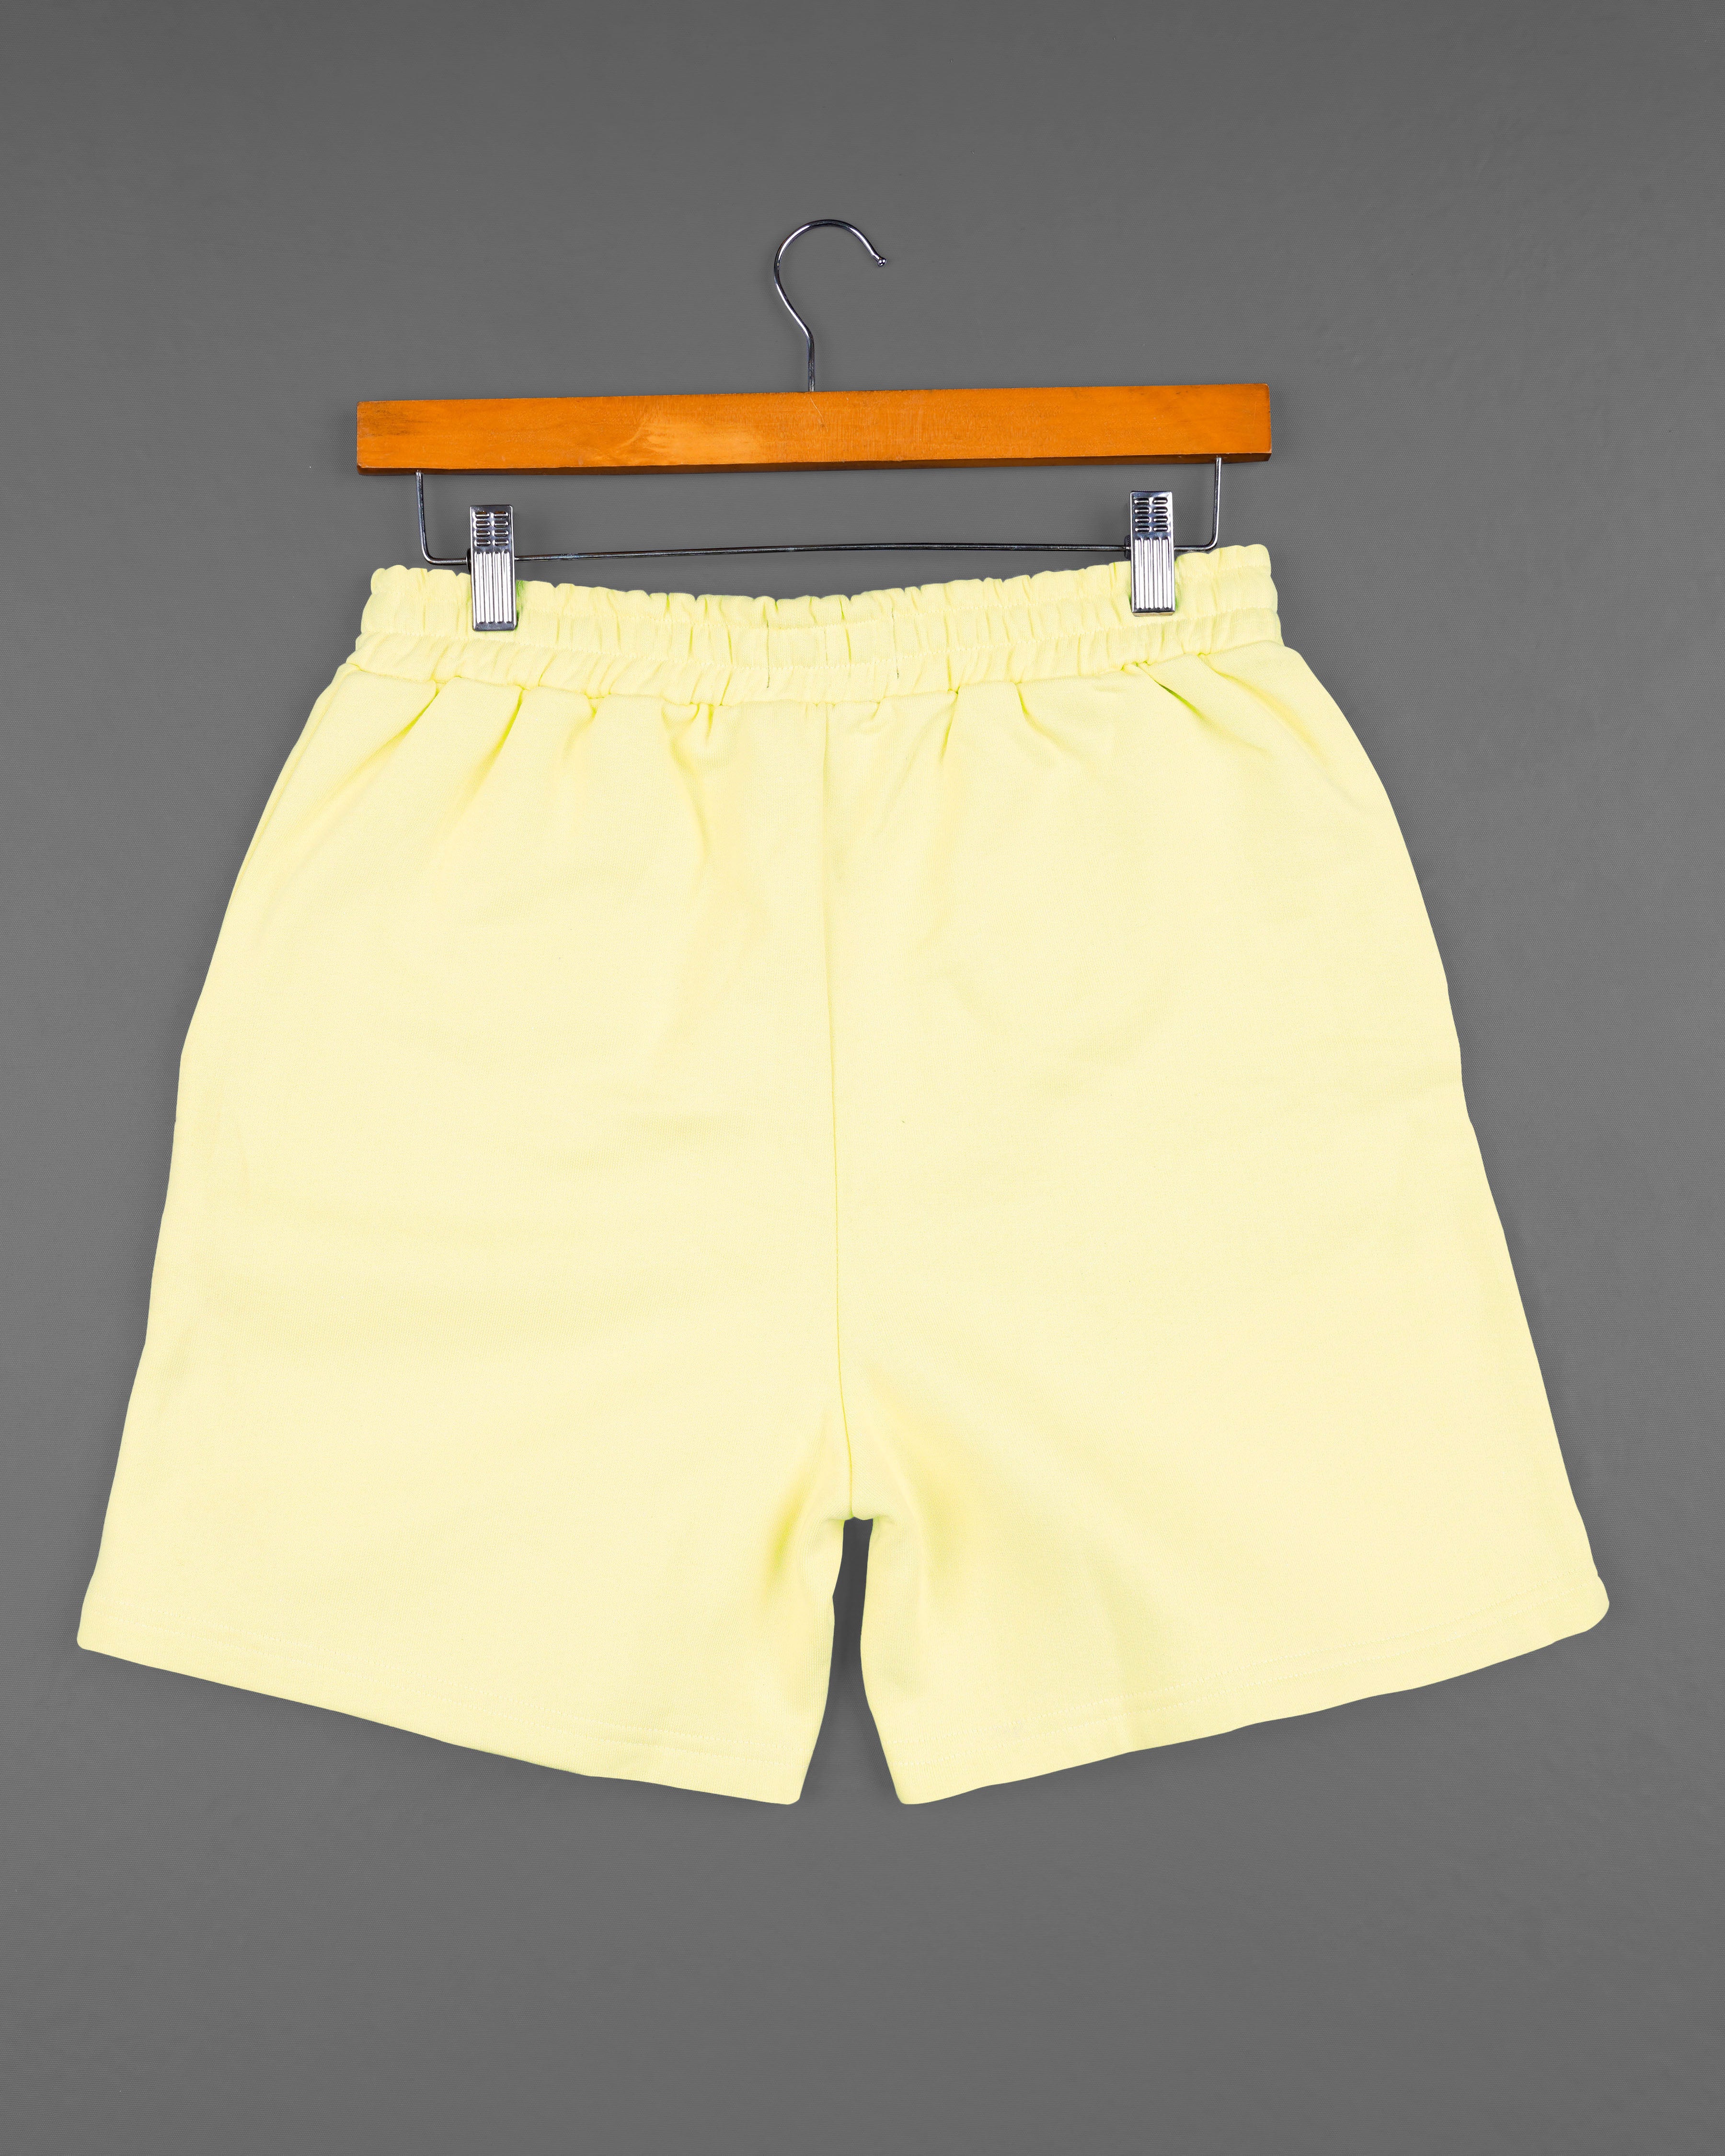 Beeswax Yellow Premium Cotton T-shirt with Shorts Combo TS697-SR172-S, TS697-SR172-M, TS697-SR172-L, TS697-SR172-XL, TS697-SR172-XXL